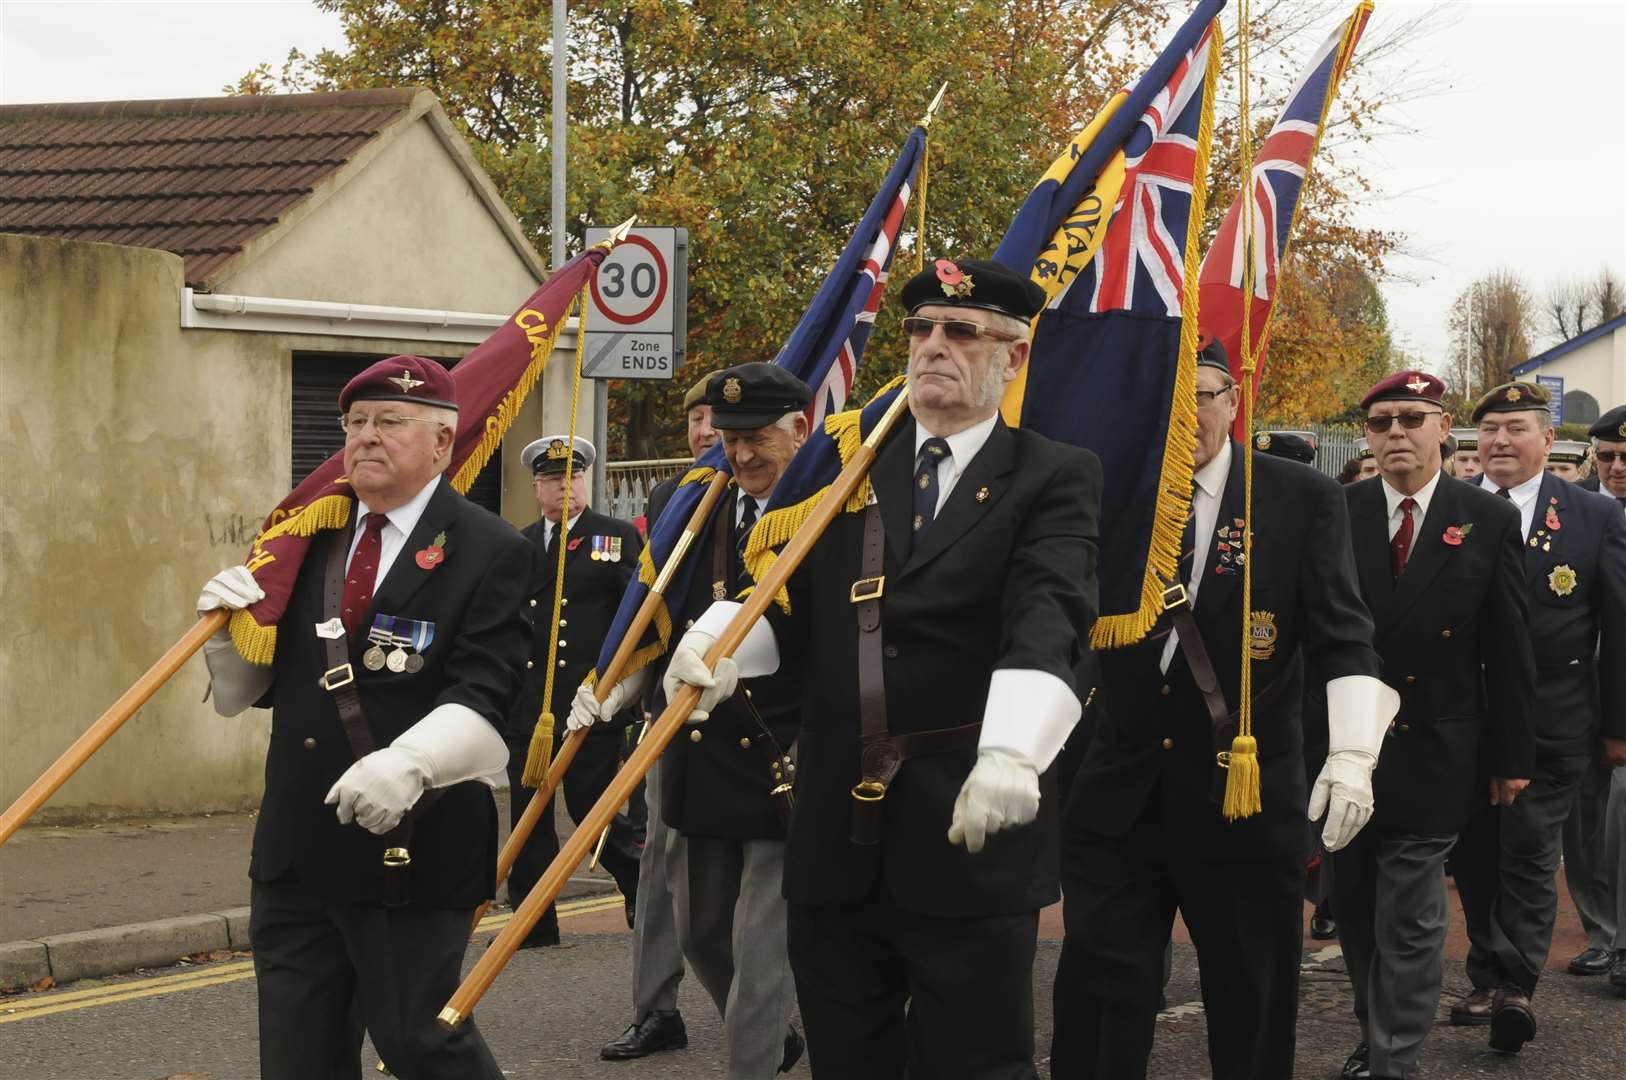 Veterans march in a Remembrance Sunday parade leaving from Trinity Road, after a service at Windmill Hill, Gravesend